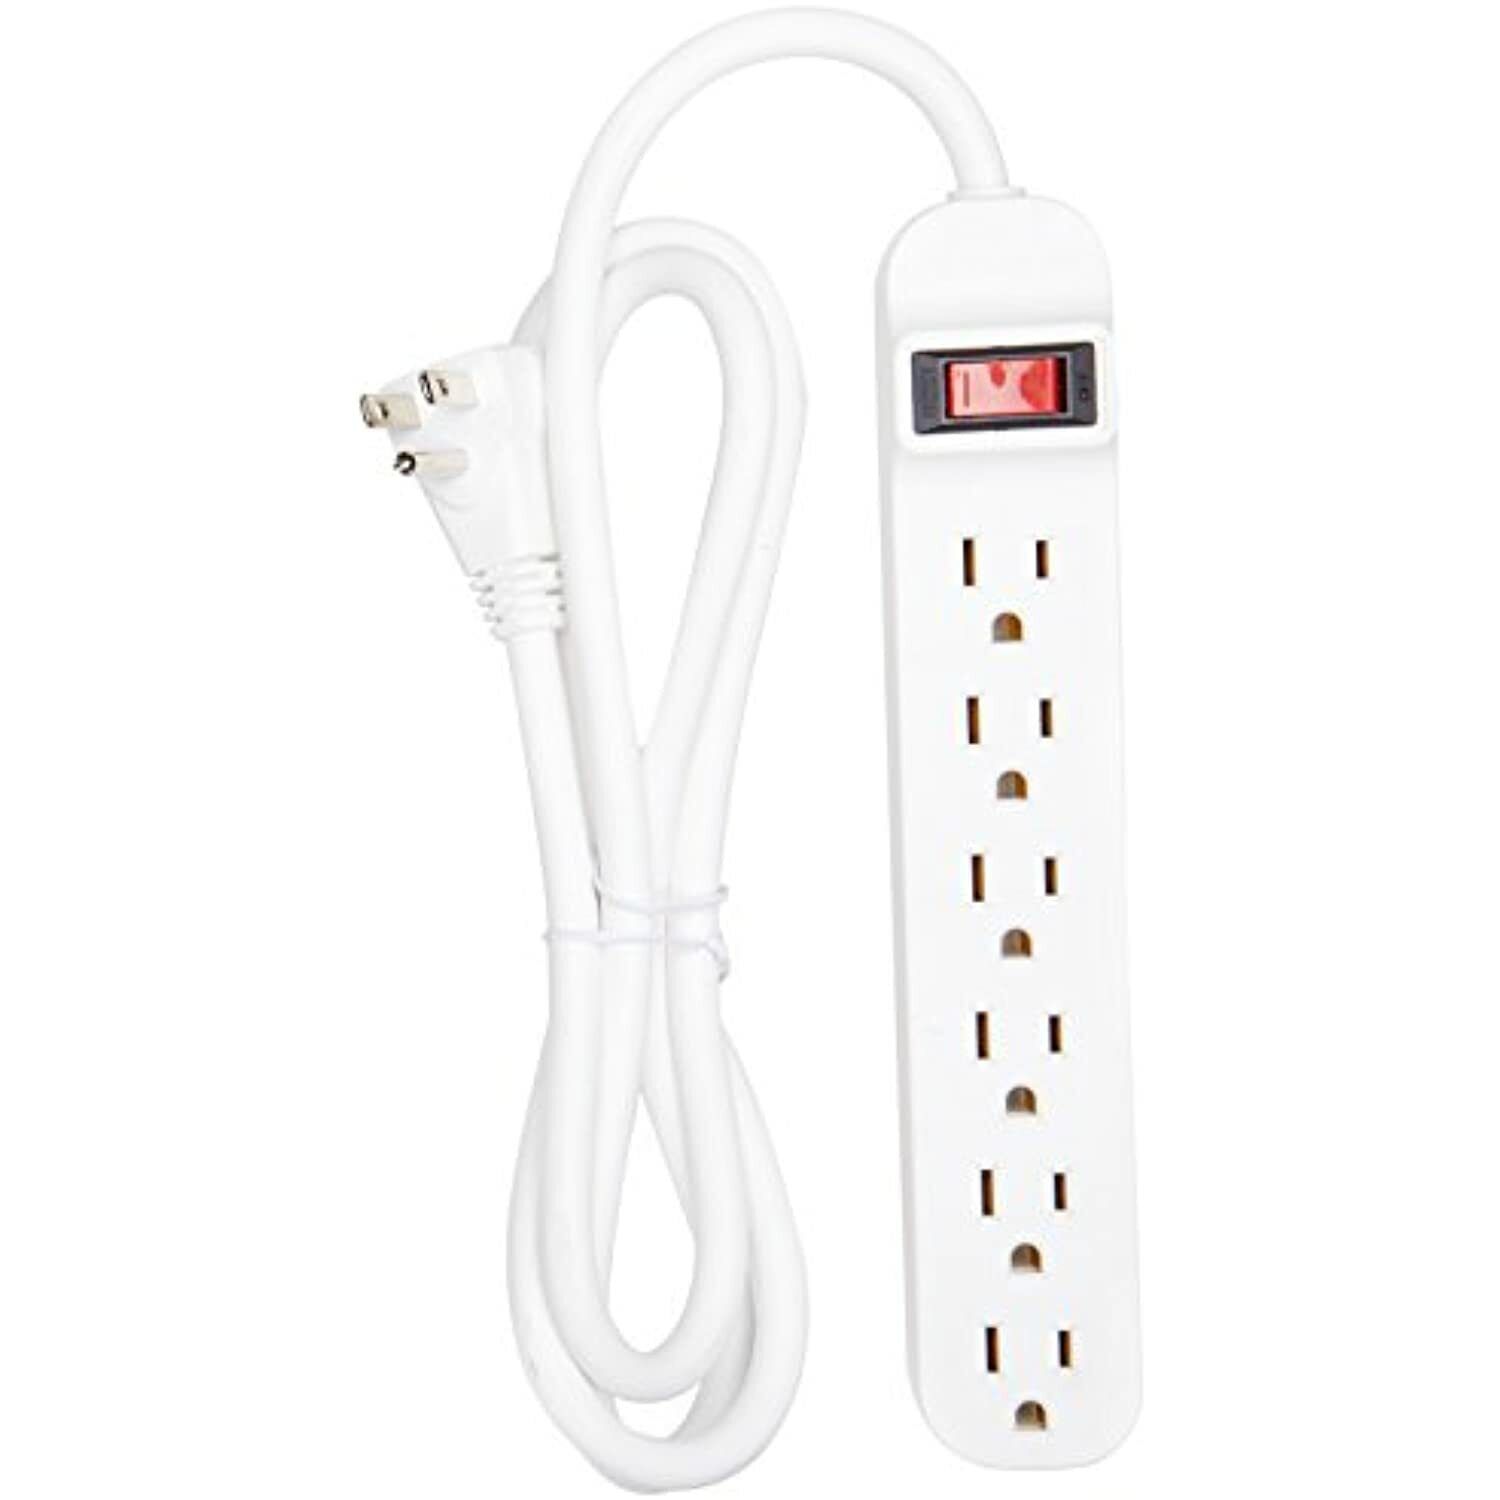 Belkin 6-Outlet Power Strip with 5-Foot Right-Angled Power Plug, F9P609-05..